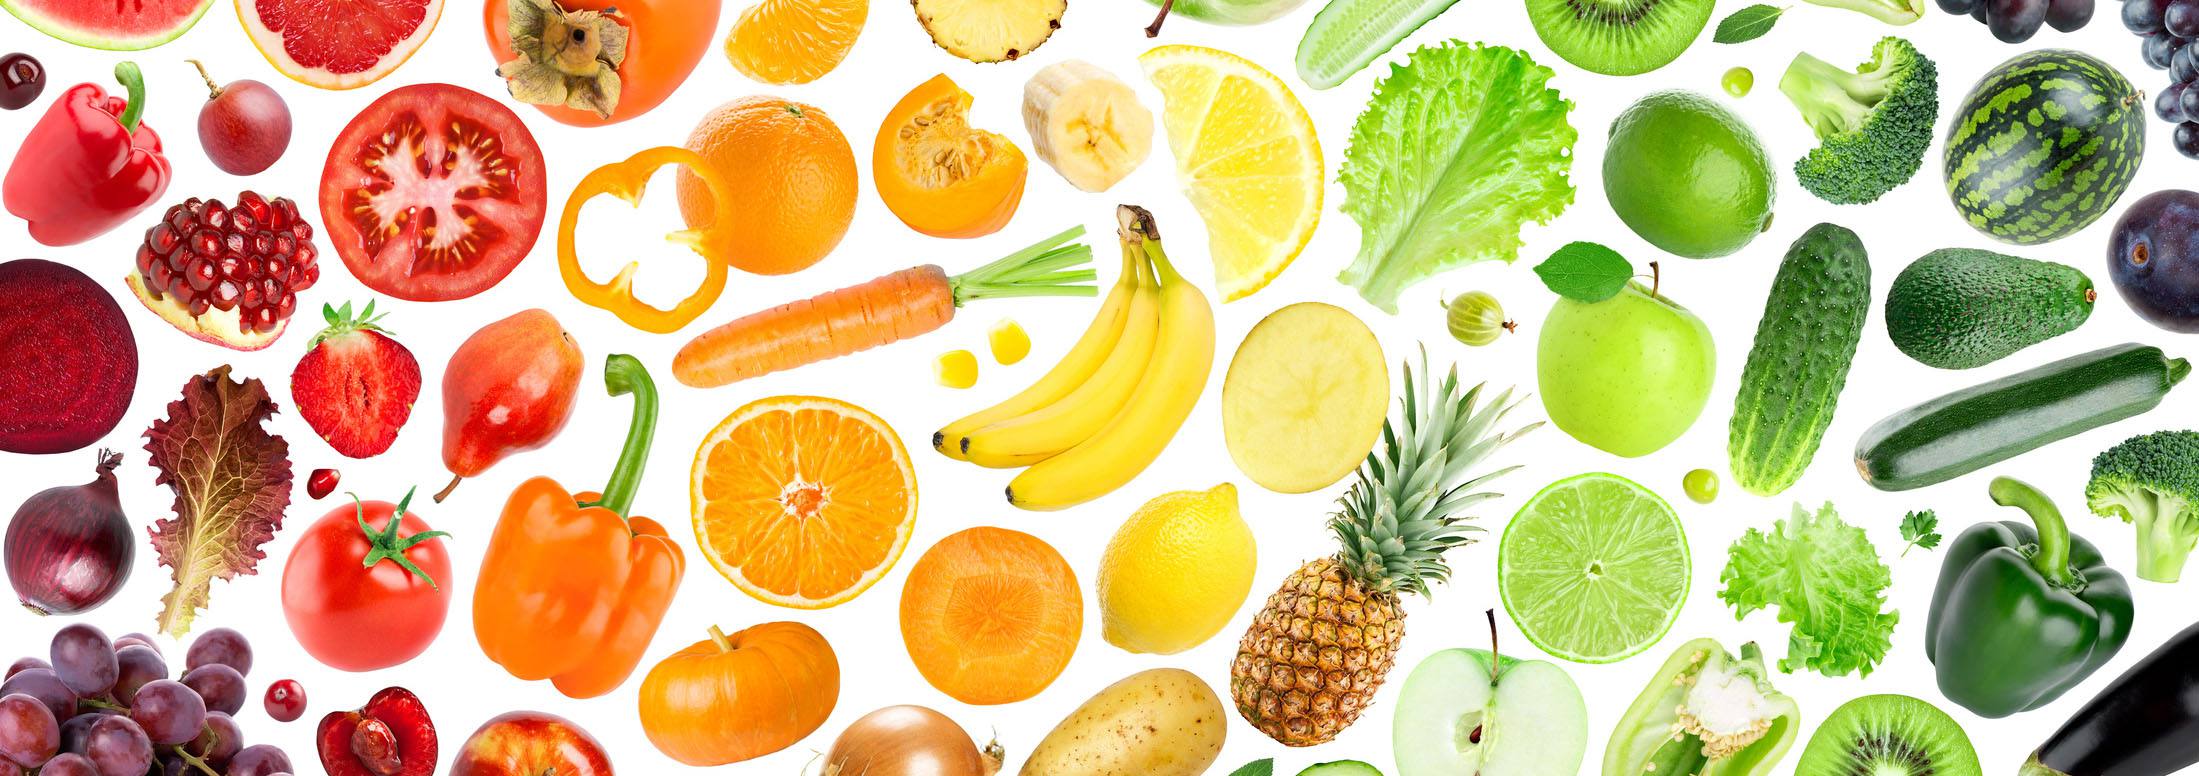 A set of fruits and vegetables on a white background